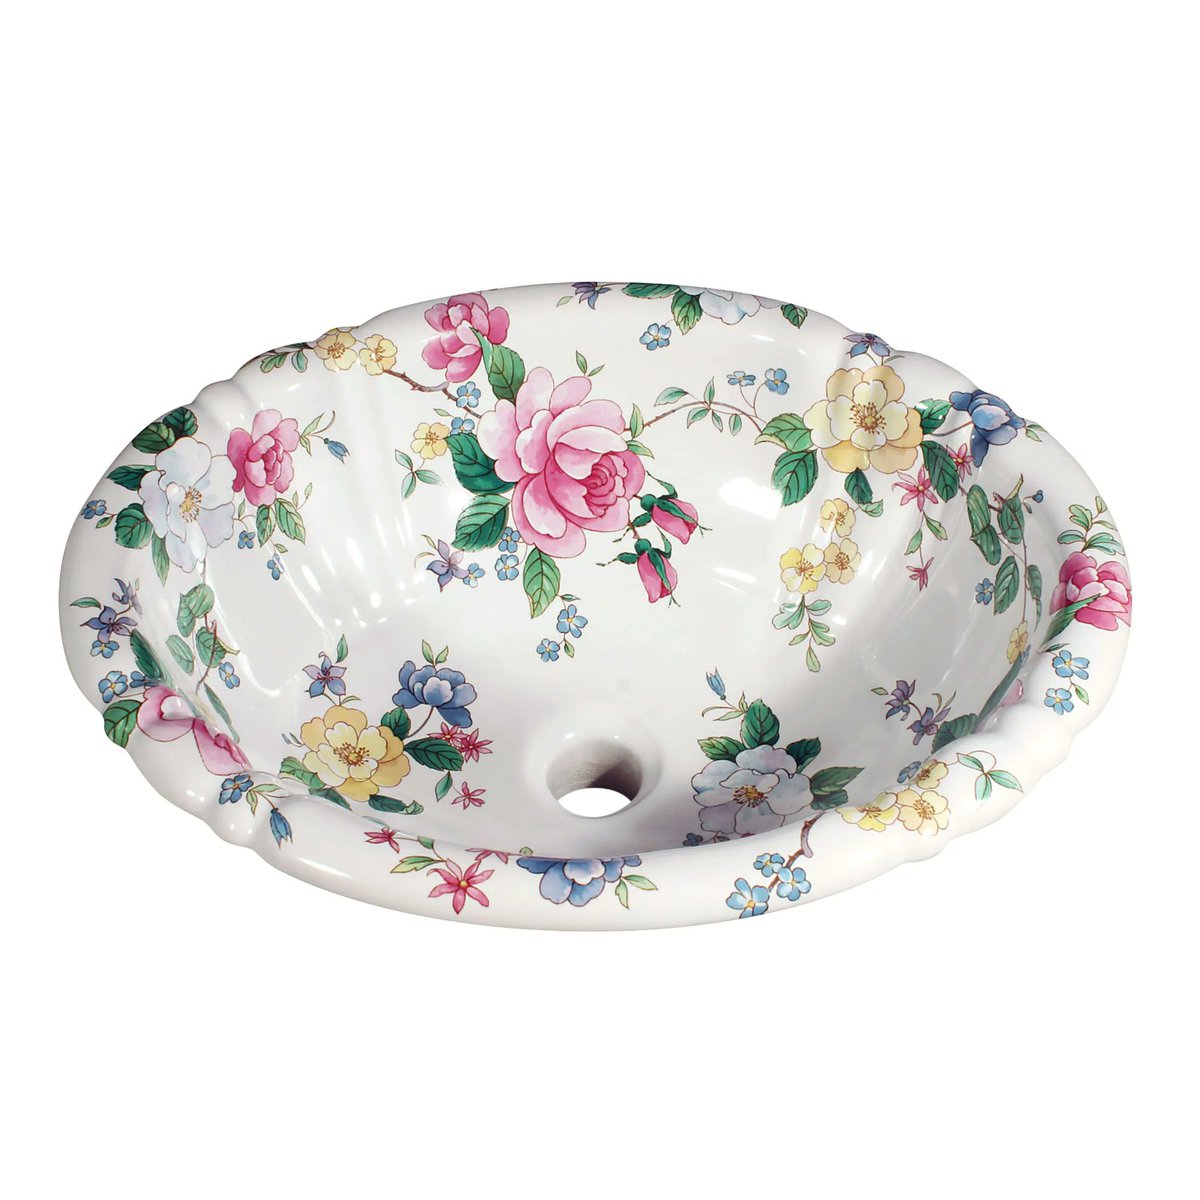 This is the Chintz-less design. Same Chintz roses, just less of them. White space is so much more complicated than filling it all in. Get one today! buff.ly/3FS2IT0 #decoratedbathroom #paintedsink #bathroomsink #flowers #bathroomideas #lavatory #chintz #victorianbathroom